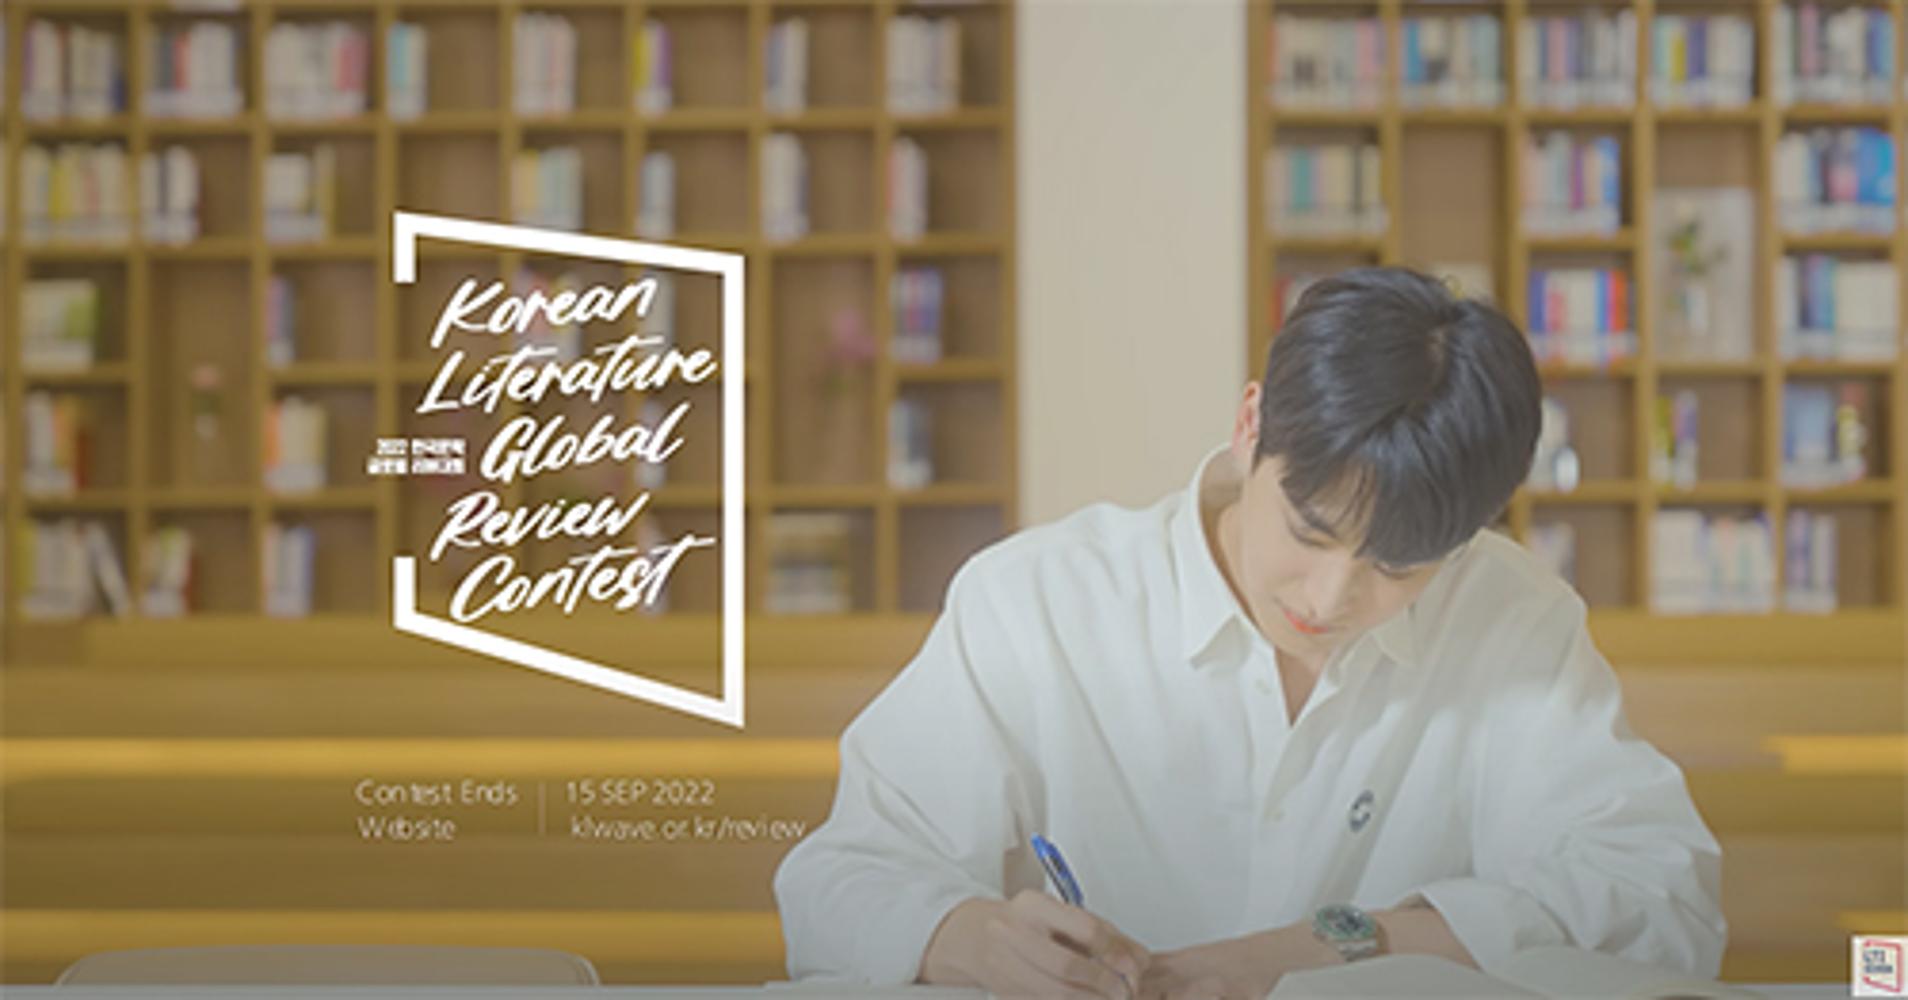 2022 Korean Literature Global Review Contest: Promotional Video